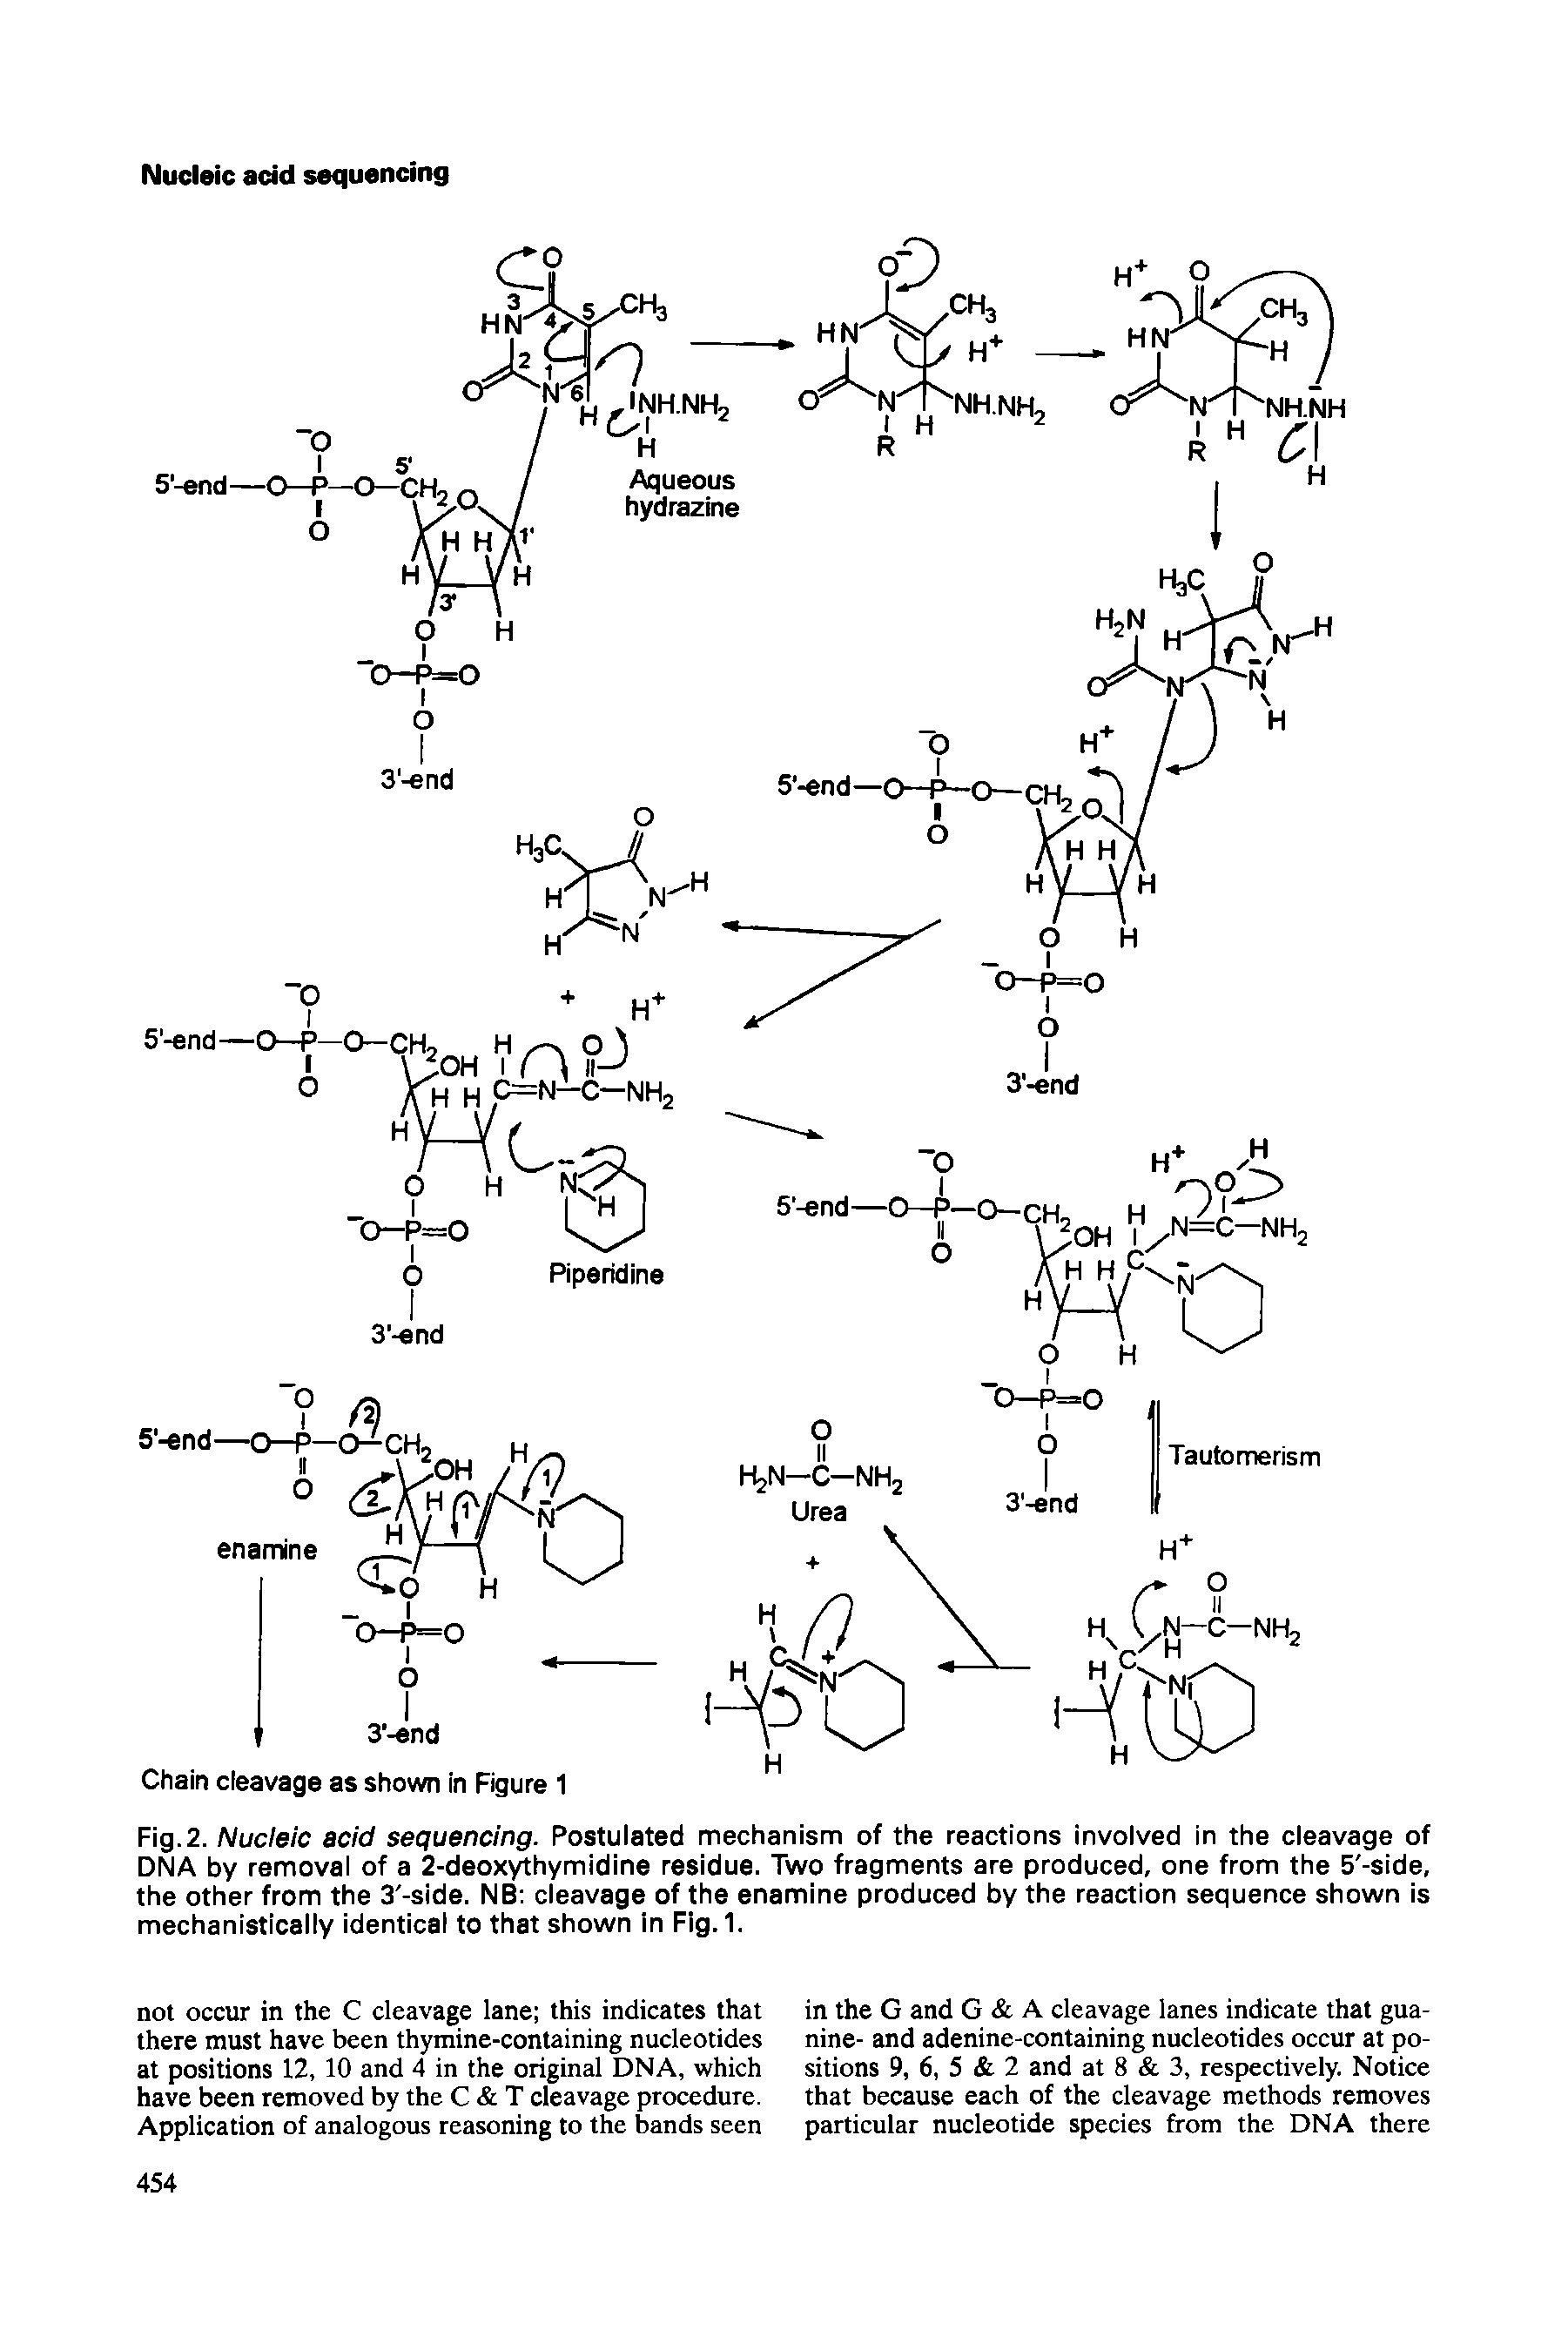 Fig. 2. Nucleic acid sequencing. Postulated mechanism of the reactions involved in the cleavage of DNA by removal of a 2-deoxythymidine residue. Two fragments are produced, one from the 5 -side, the other from the 3 -side. NB cleavage of the enamine produced by the reaction sequence shown is mechanistically identical to that shown in Fig.1.